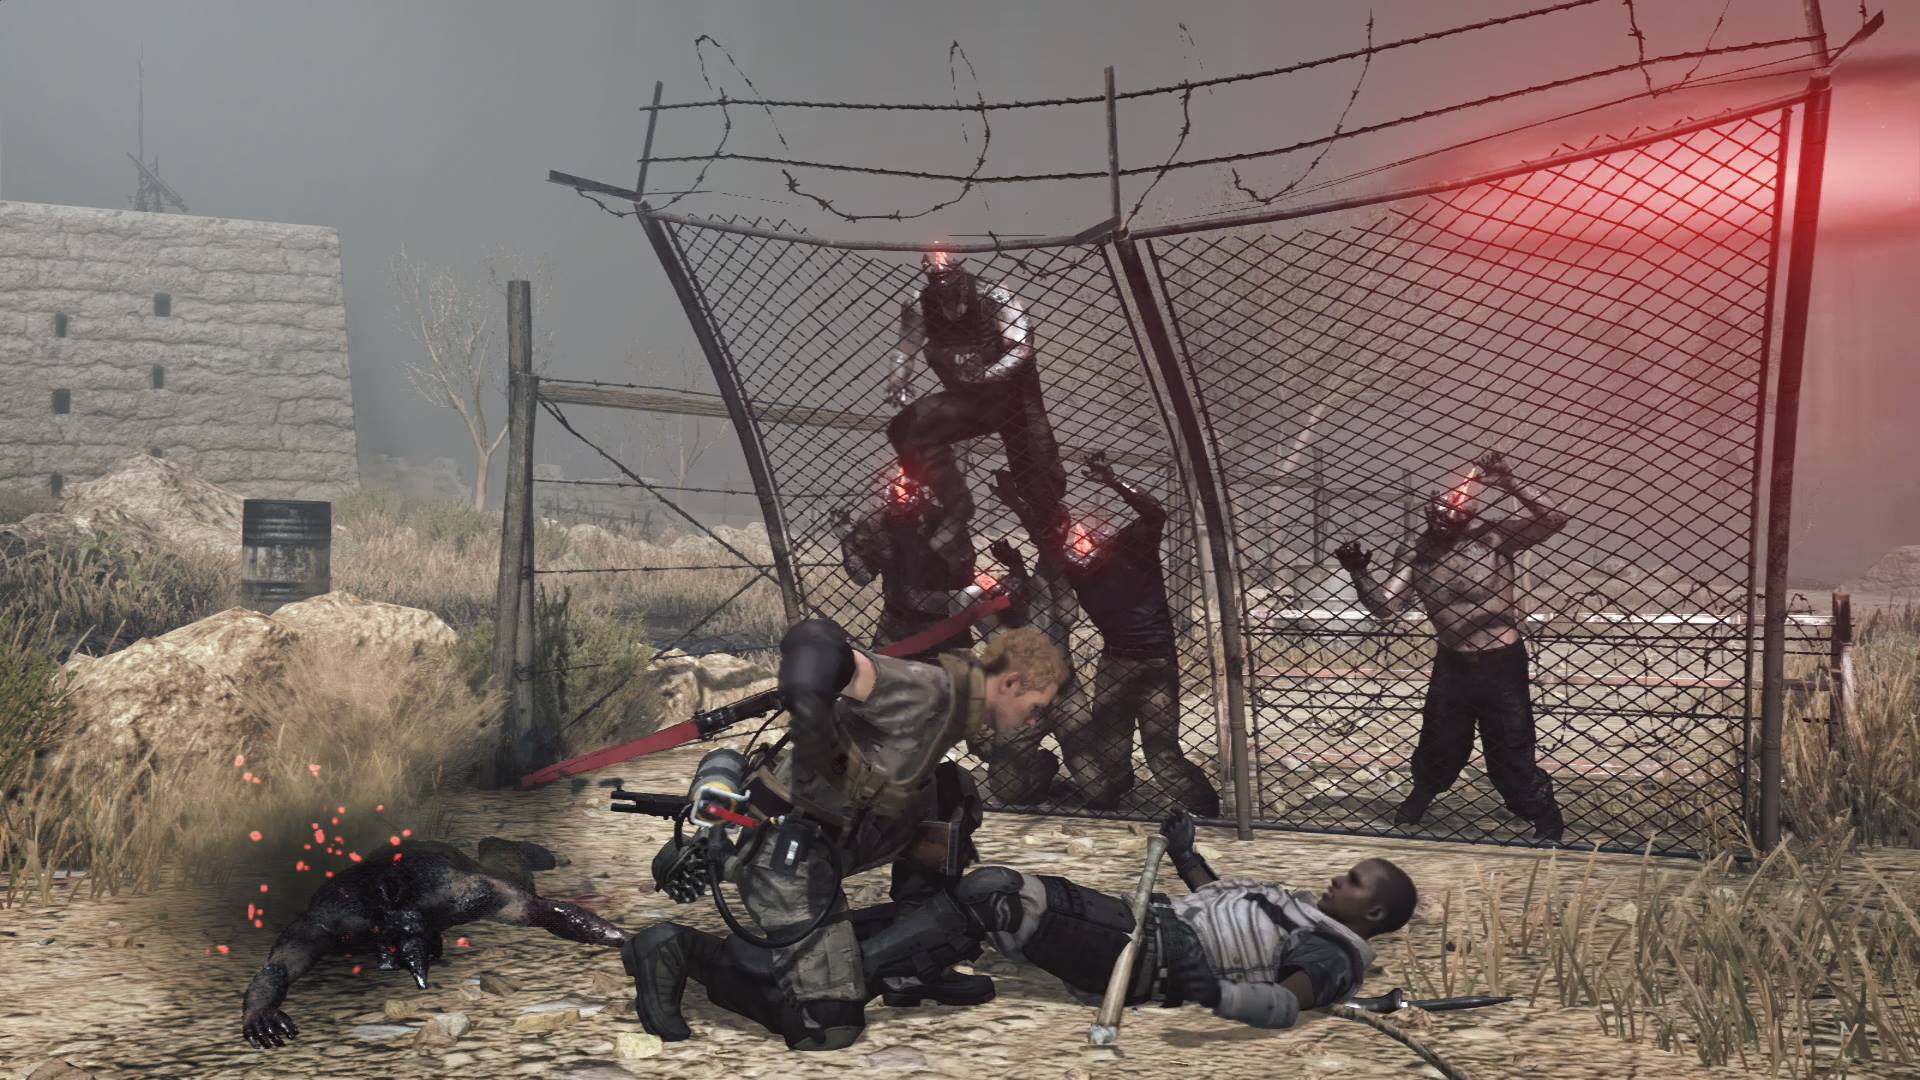 Media asset in full size related to 3dfxzone.it news item entitled as follows: Konami pubblica nuovi screenshots del game Metal Gear Survive | Image Name: news26540_Metal-Gear-Survive-Screenshots_8.jpg